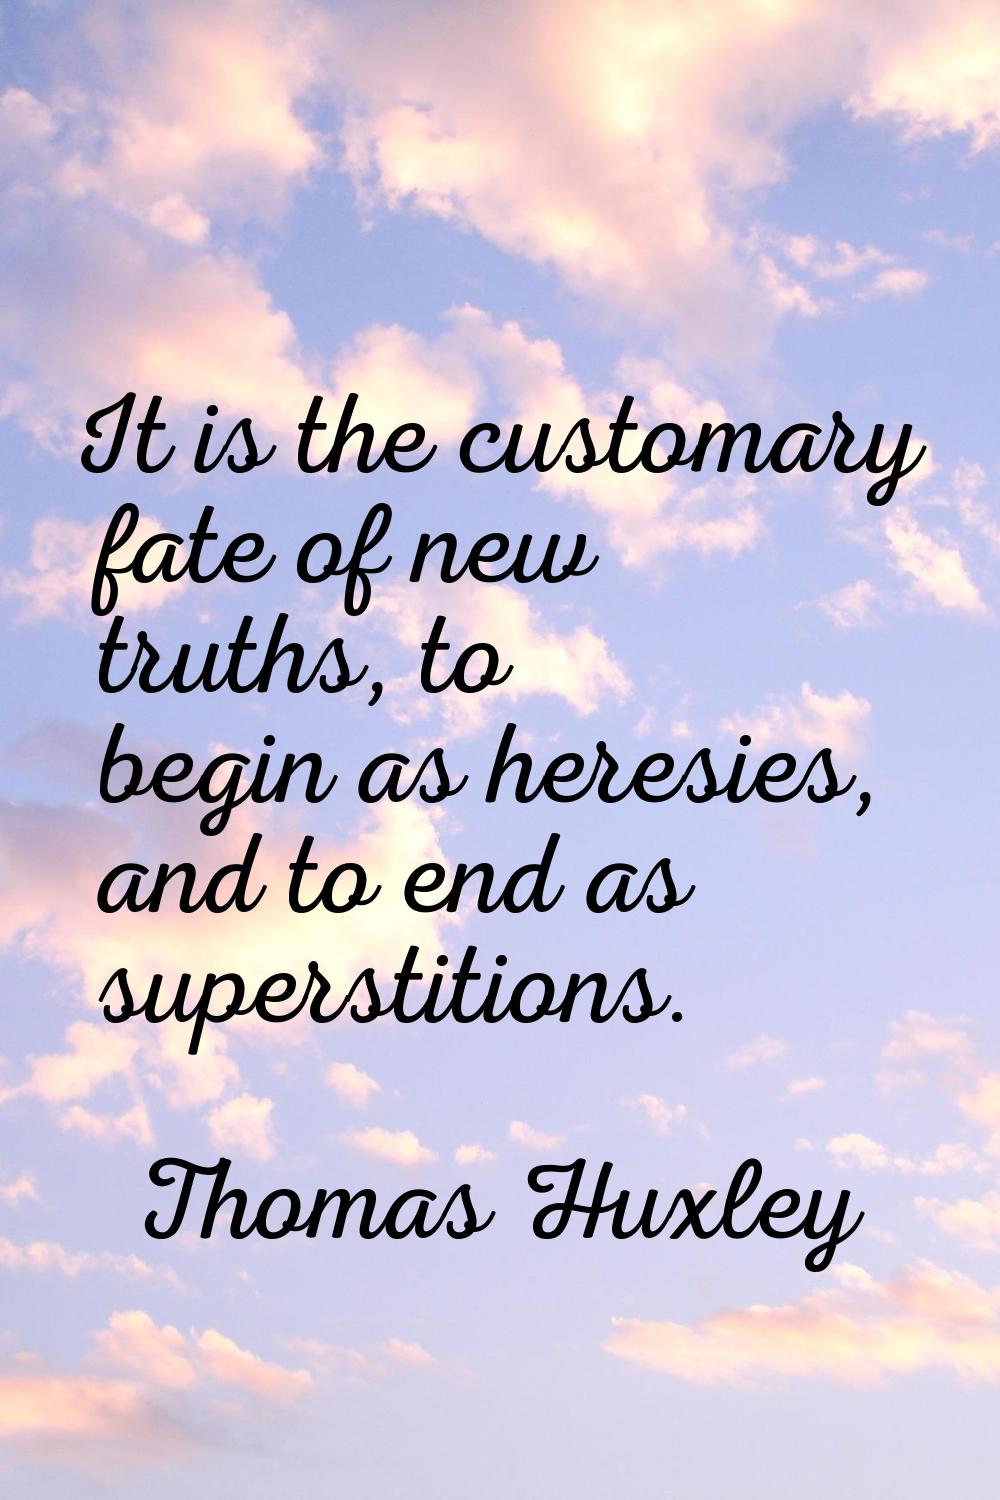 It is the customary fate of new truths, to begin as heresies, and to end as superstitions.